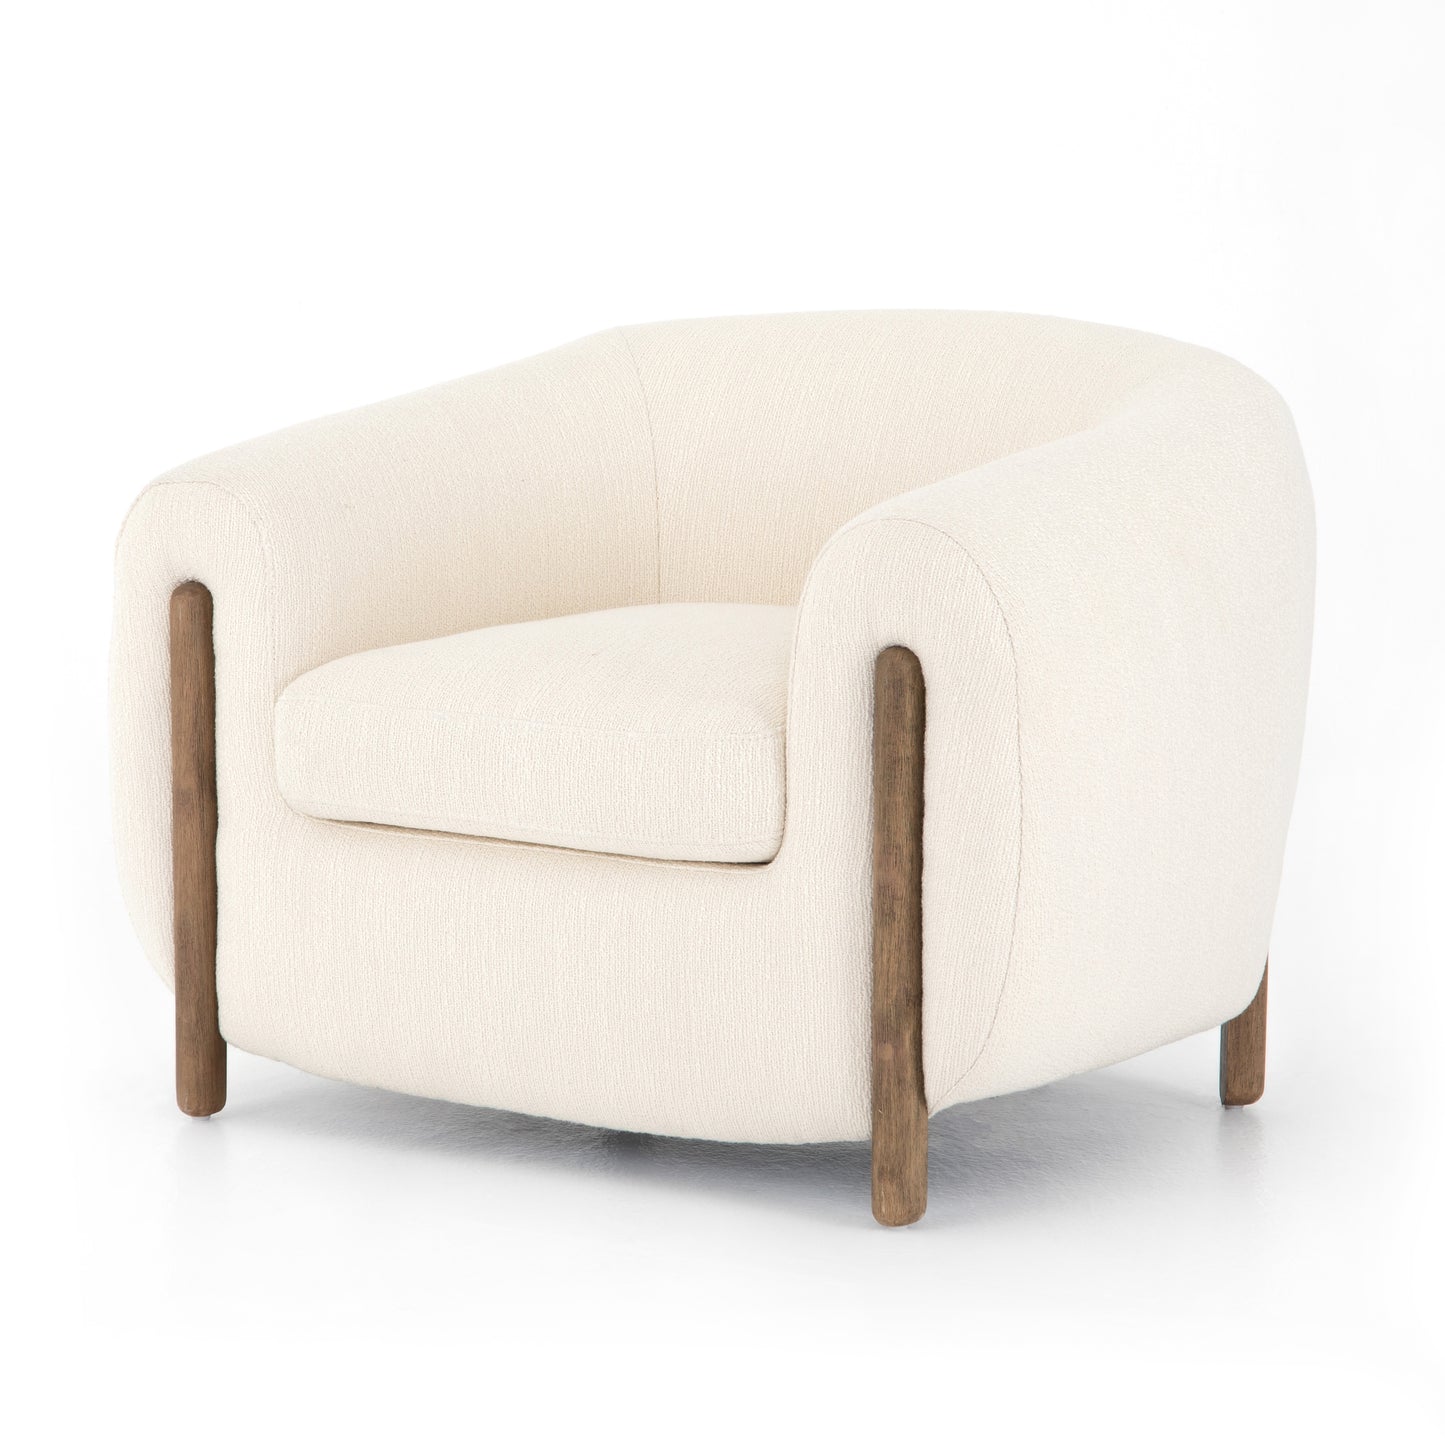 Lyla Chair Kerbey IvoryLounge Chair Four Hands  Kerbey Ivory   Four Hands, Mid Century Modern Furniture, Old Bones Furniture Company, Old Bones Co, Modern Mid Century, Designer Furniture, https://www.oldbonesco.com/